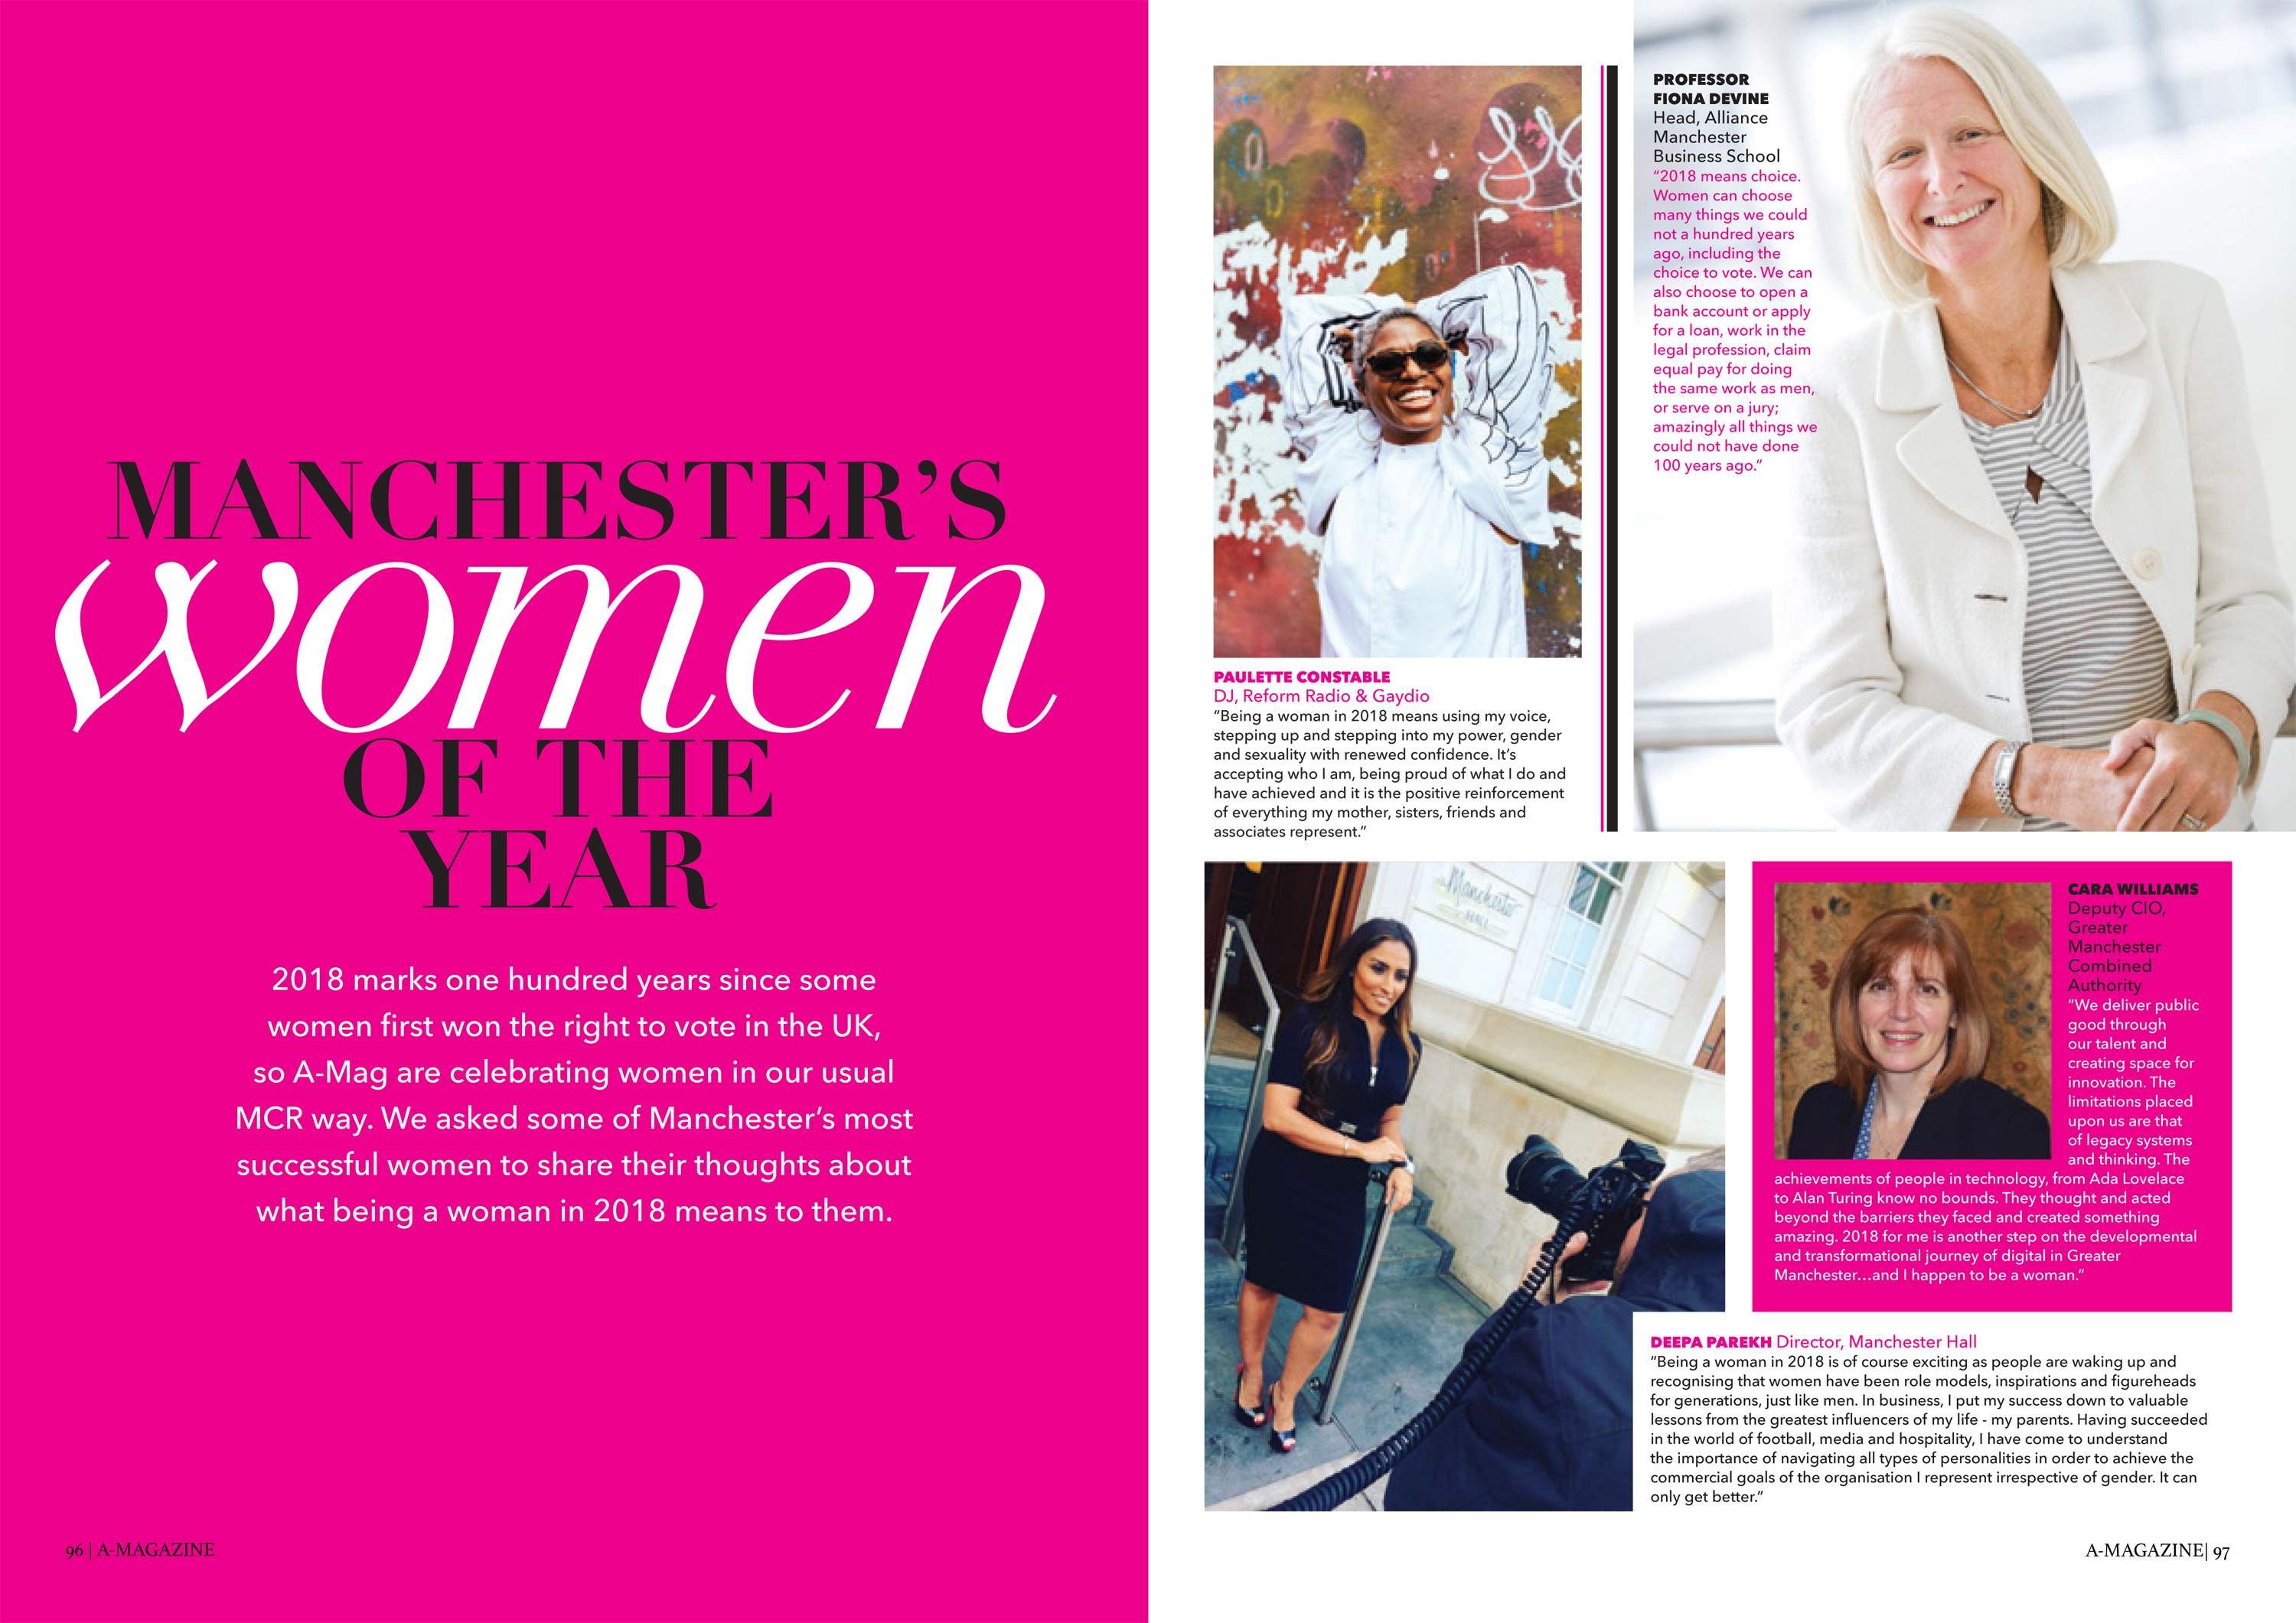 #HOTOFFTHEPRESS – THE A-MAGAZINE ‘MANCHESTER WOMEN OF THE YEAR’